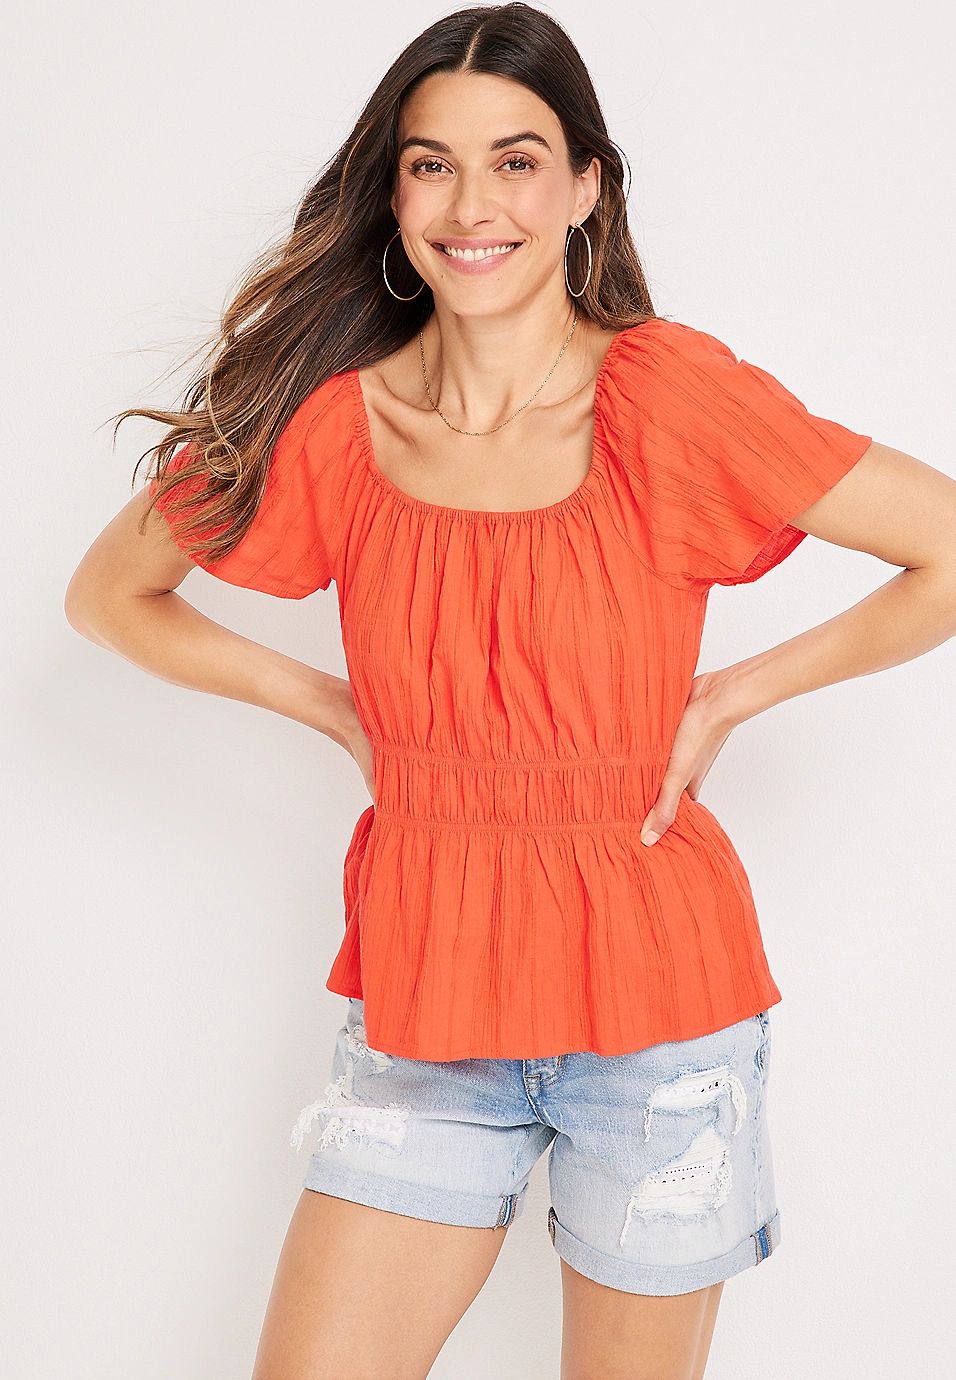 30–50% off everything (including clearance) | Maurices